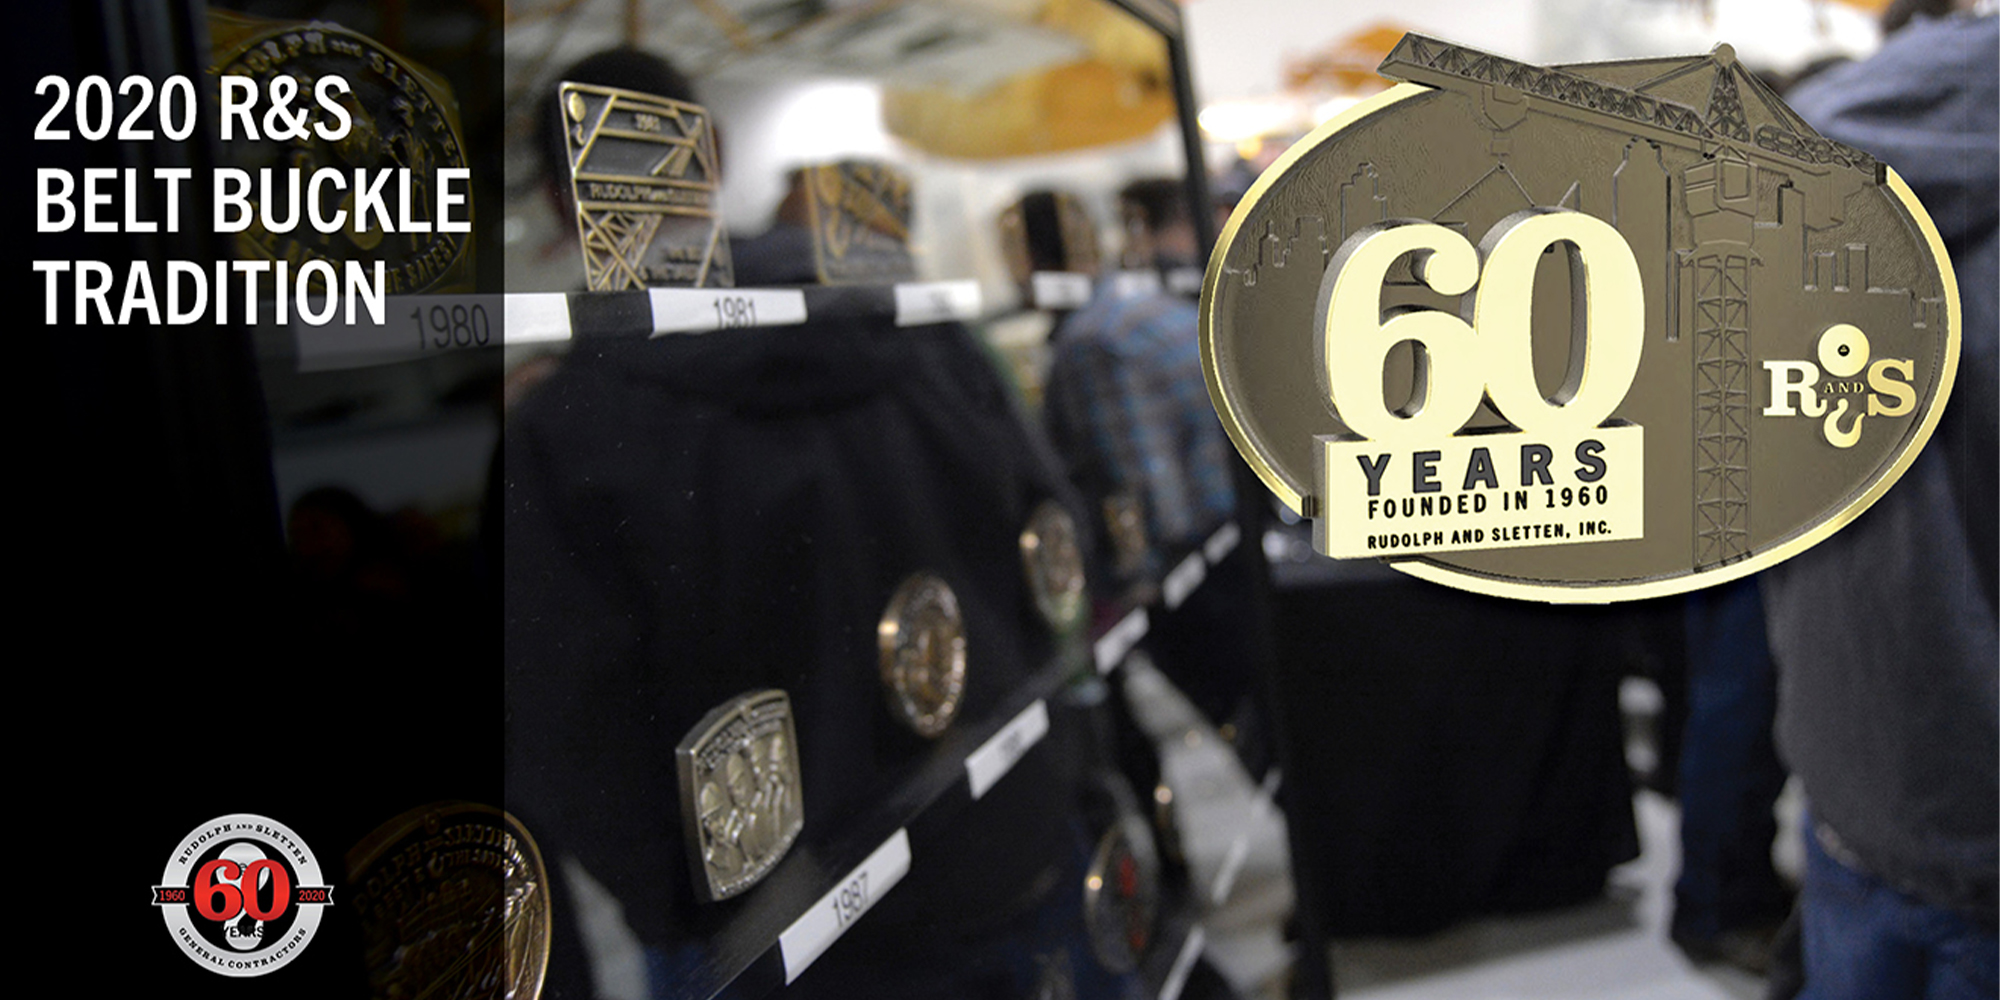 Belt Buckle tradition marks its 40th year